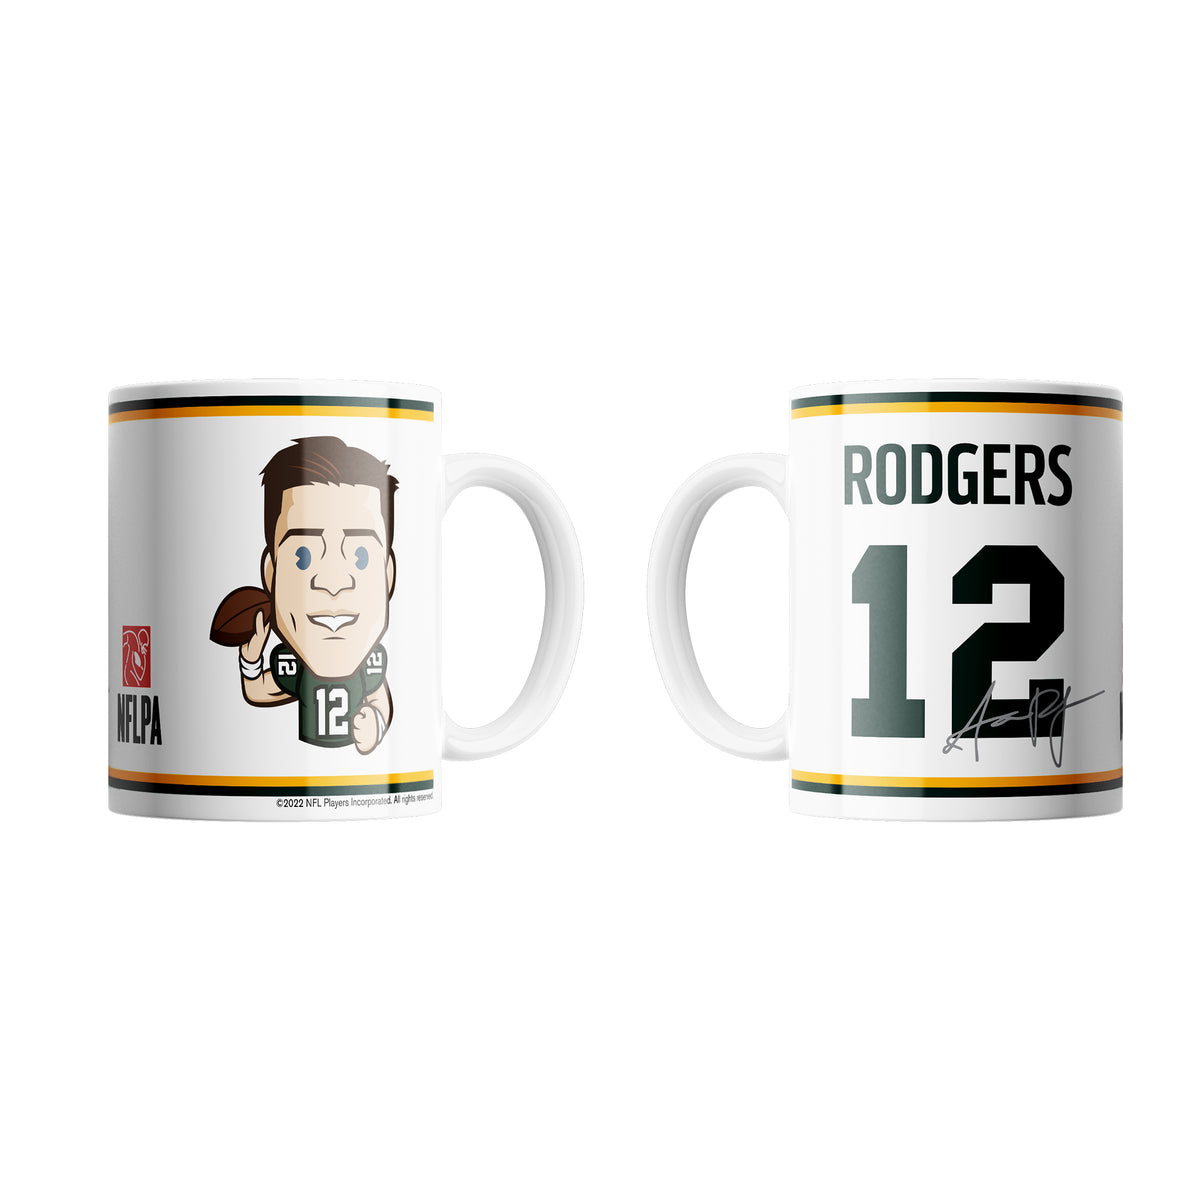 NFL Aaron Rodgers Welcome To New York Jets For Fans Coffee Ceramic Mug -  Mugteeco